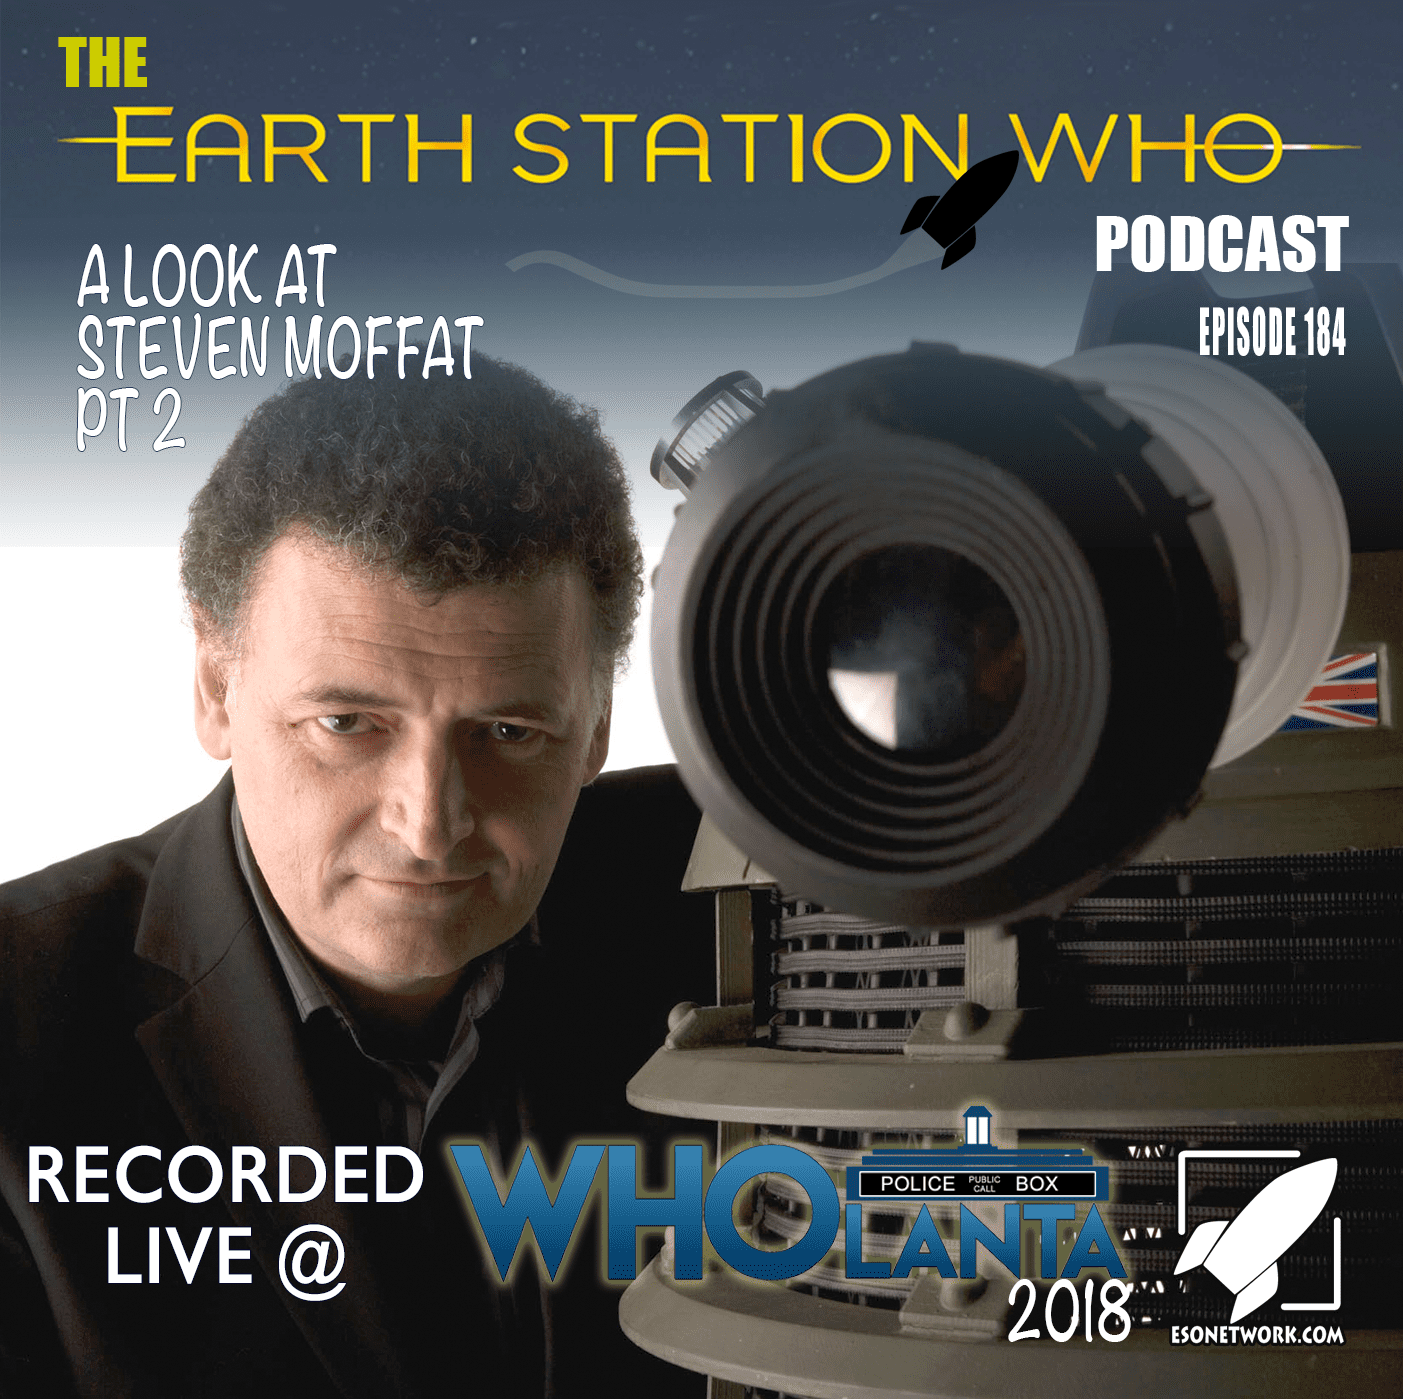 The Earth Station Who Podcast Ep 184